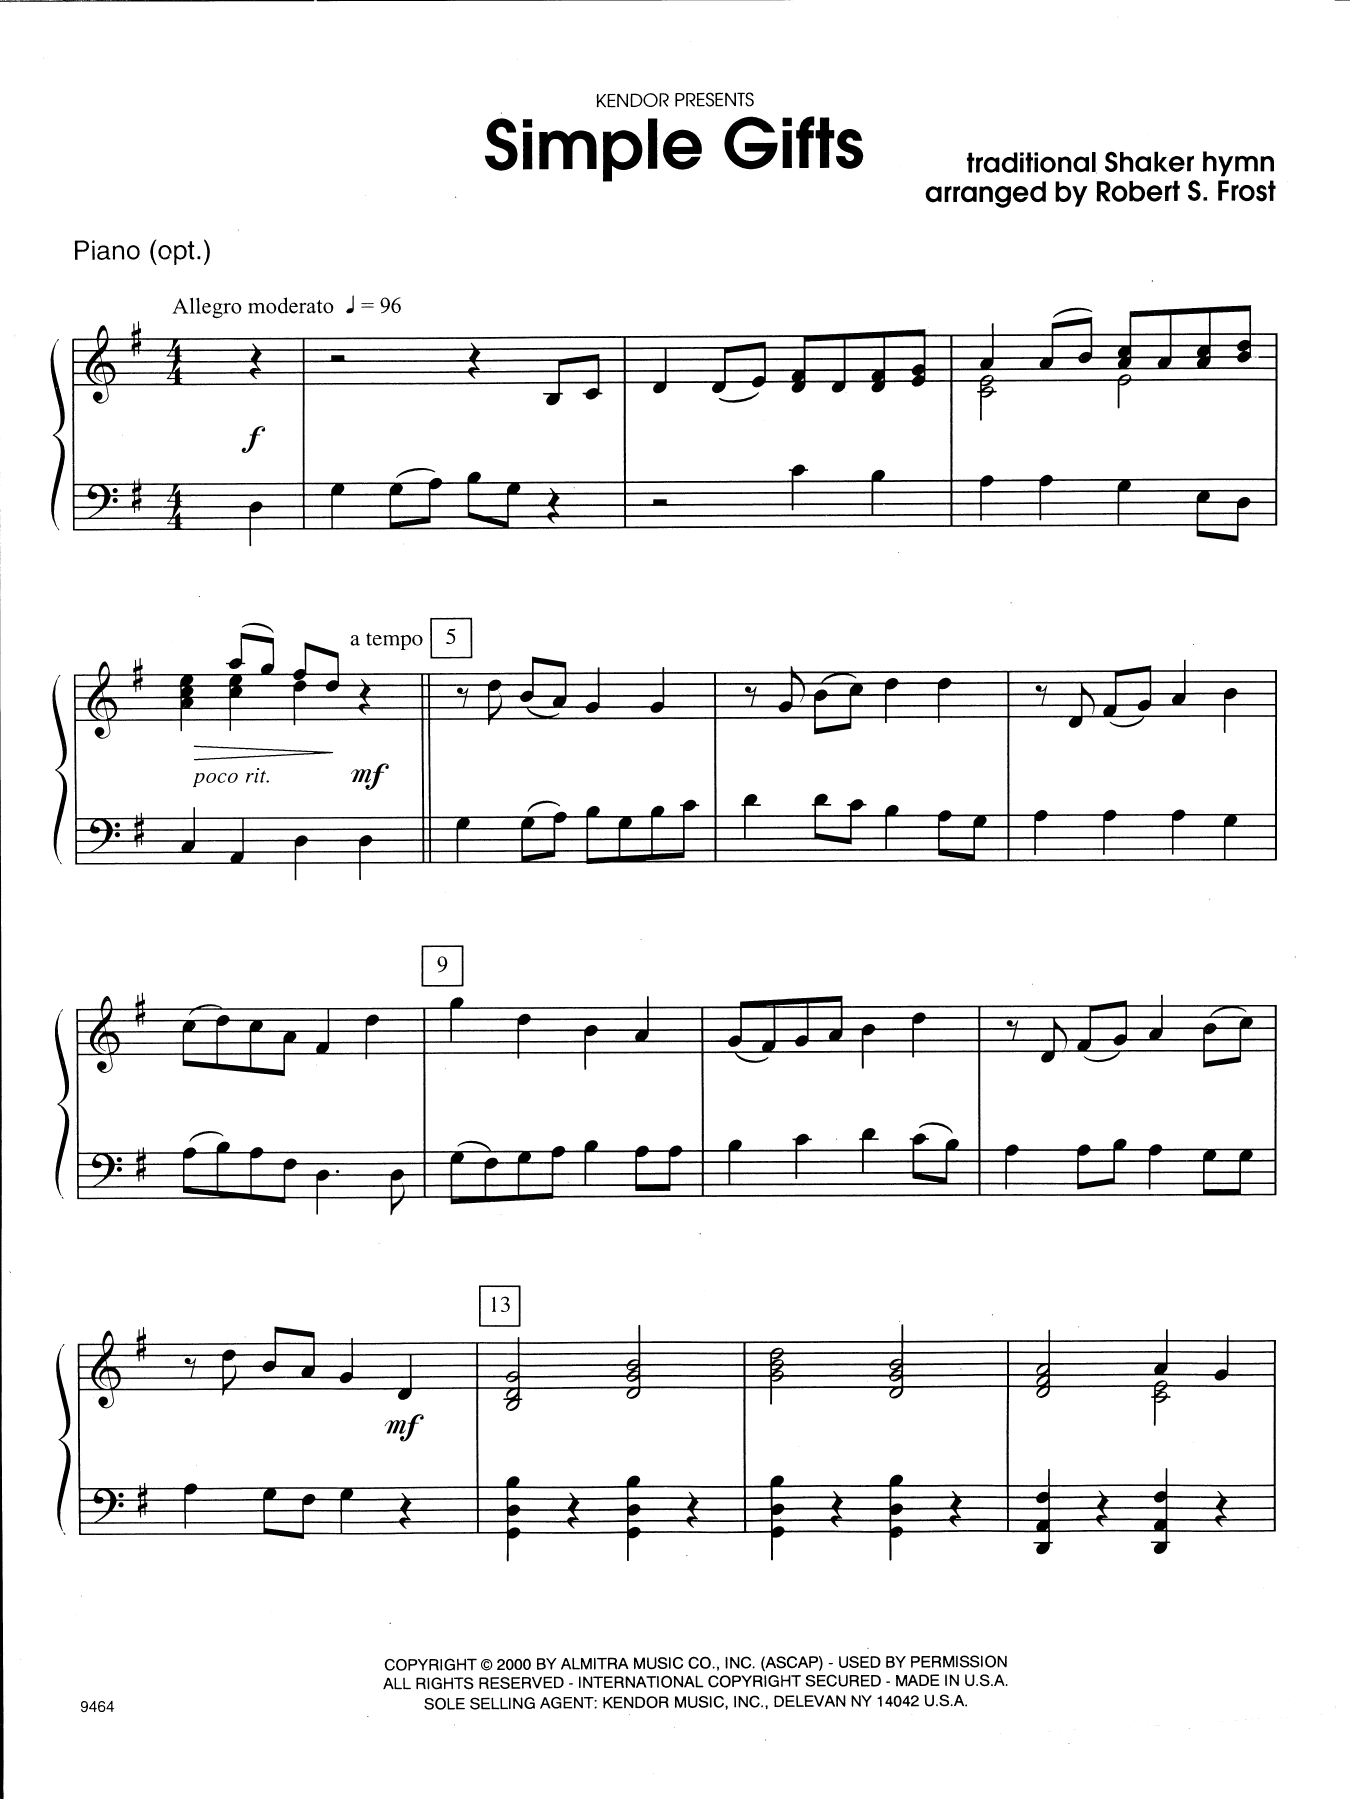 Download Robert S. Frost Simple Gifts - Piano Accompaniment Sheet Music